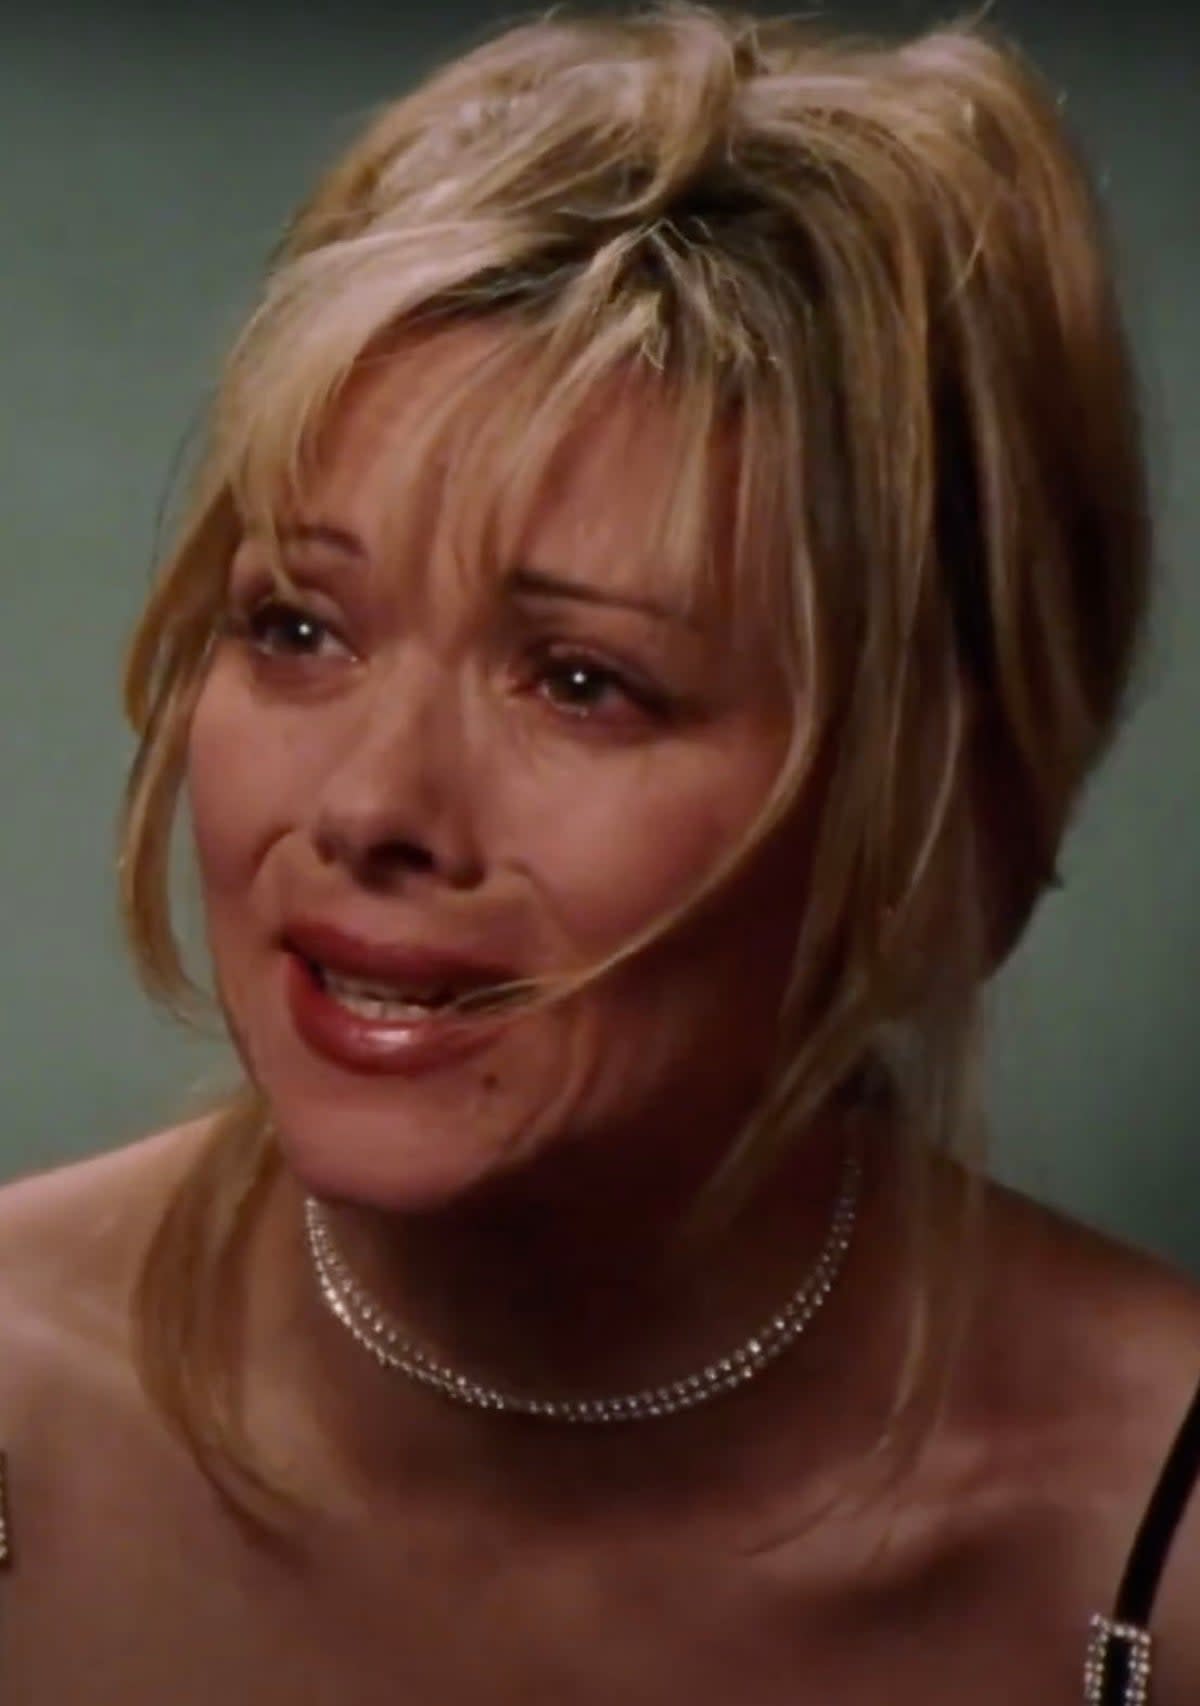 Kim Cattrall’s Samantha weeps over the insubstantial size of her boyfriend’s penis in a classic episode of ‘Sex and the City’ (HBO)